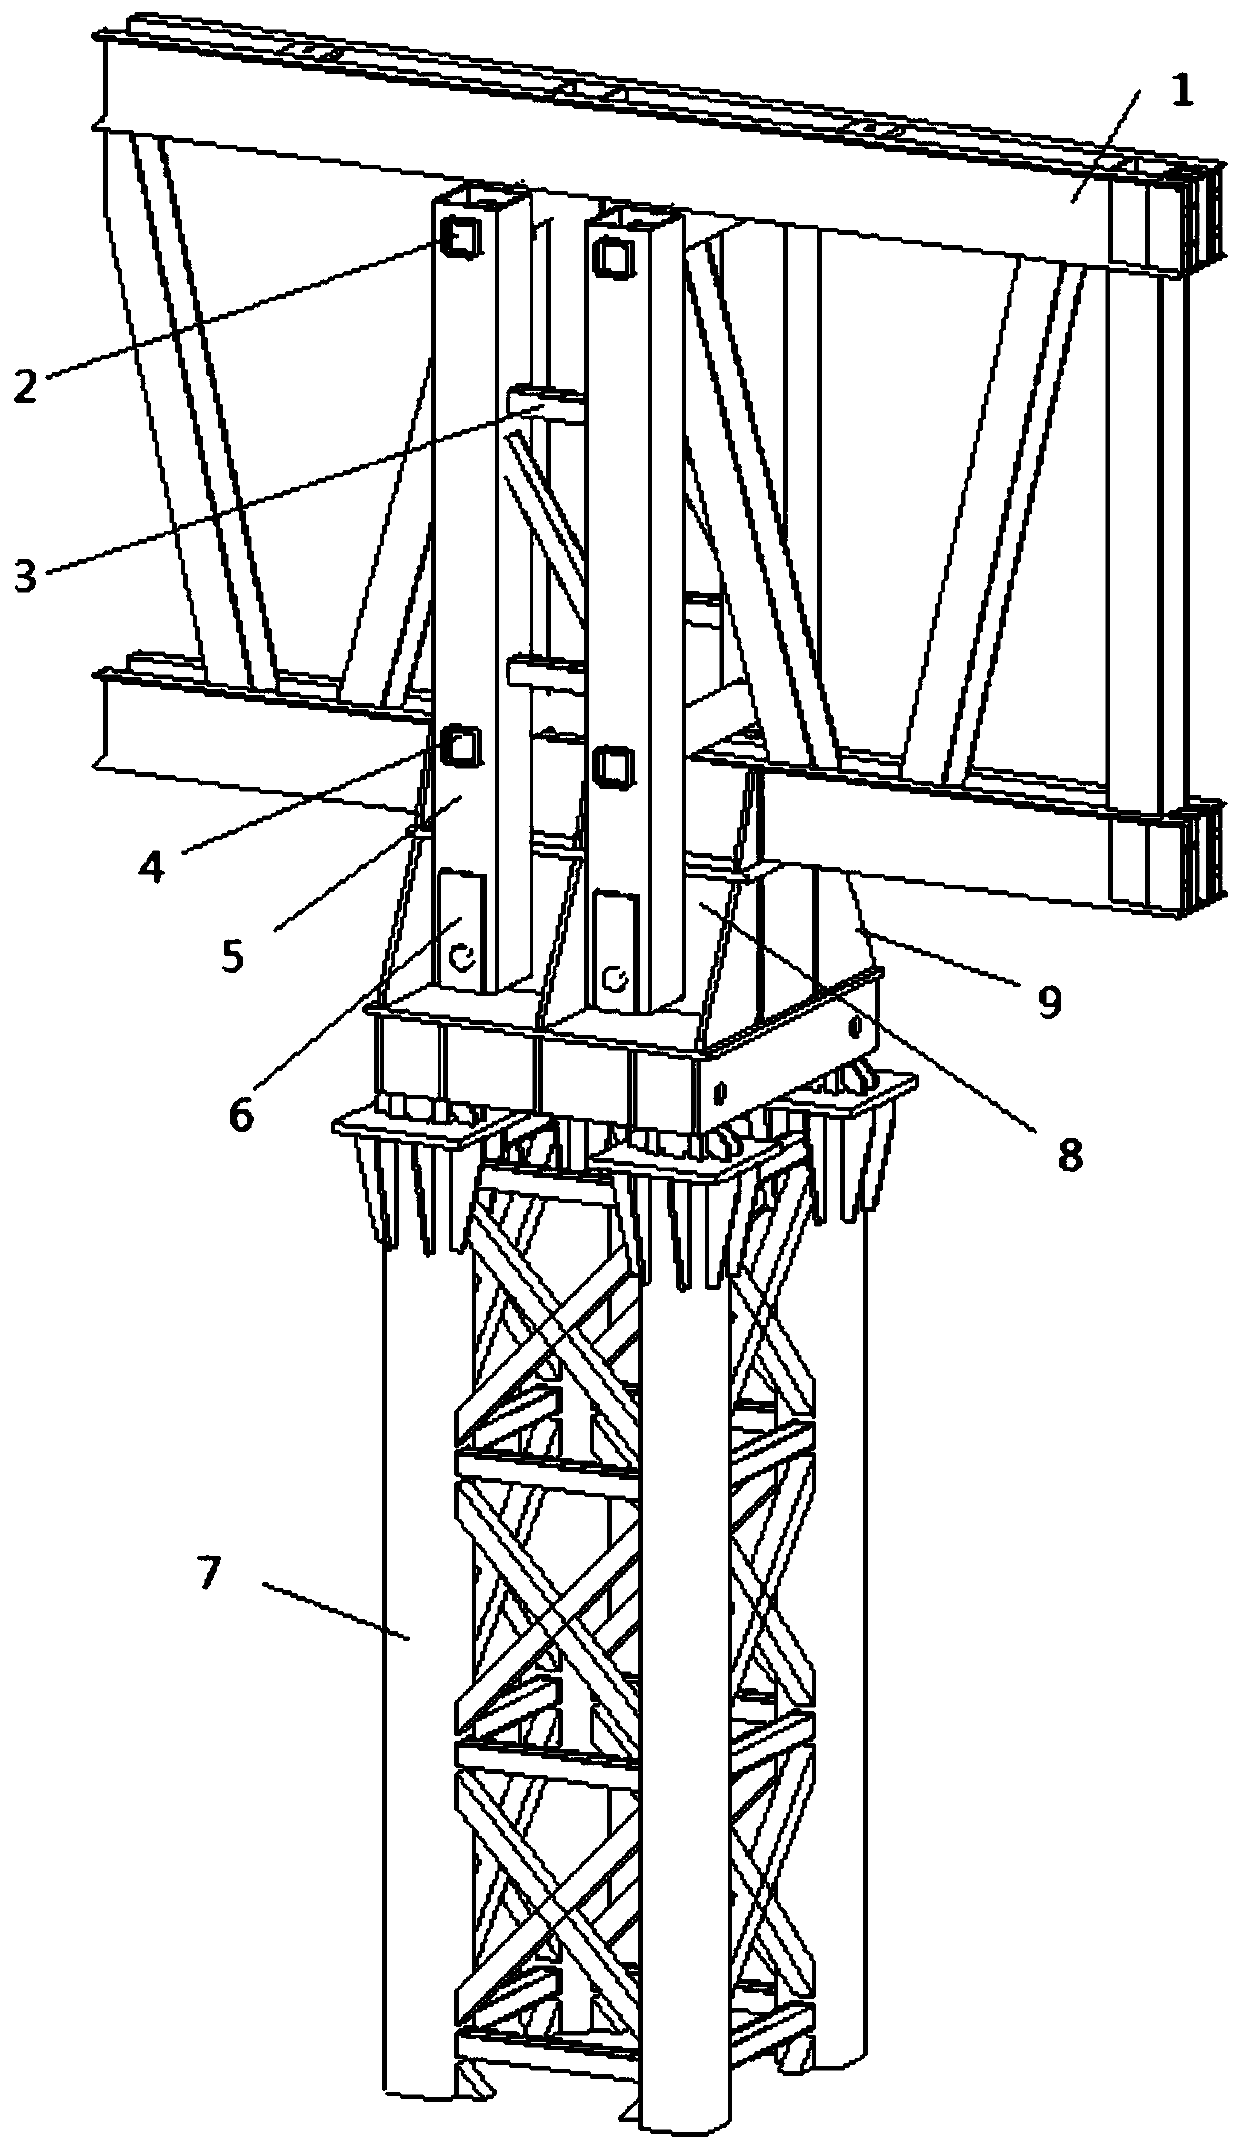 Column-top overturn-preventing device for jacking formwork system